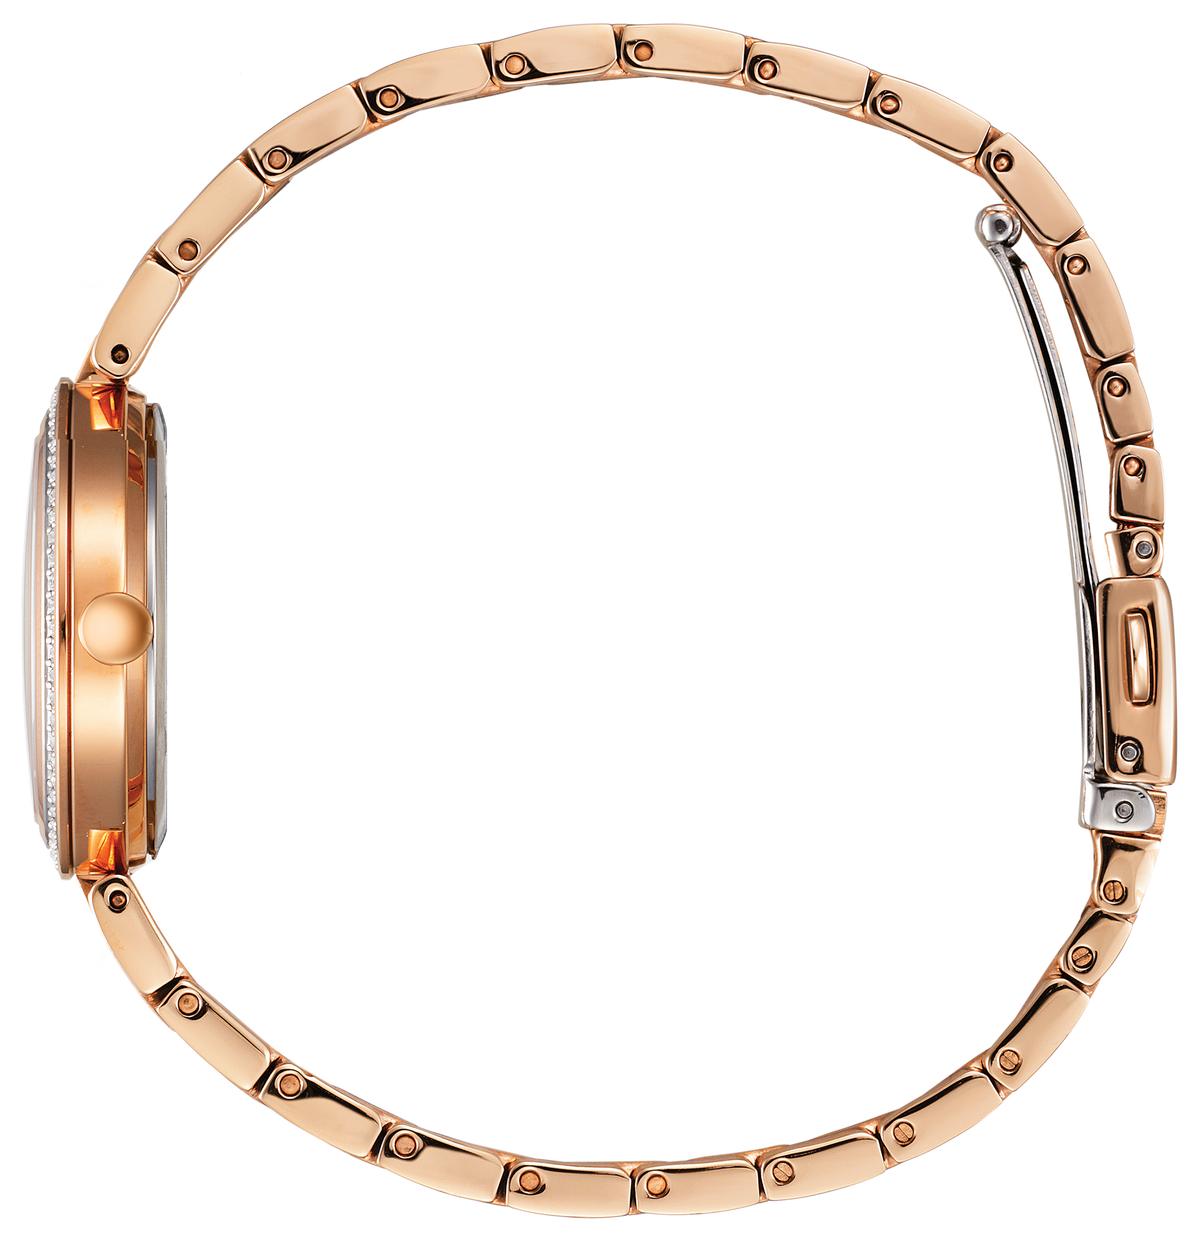 Citizen Eco-Drive - SILHOUETTE CRYSTAL - Rose Gold Tone